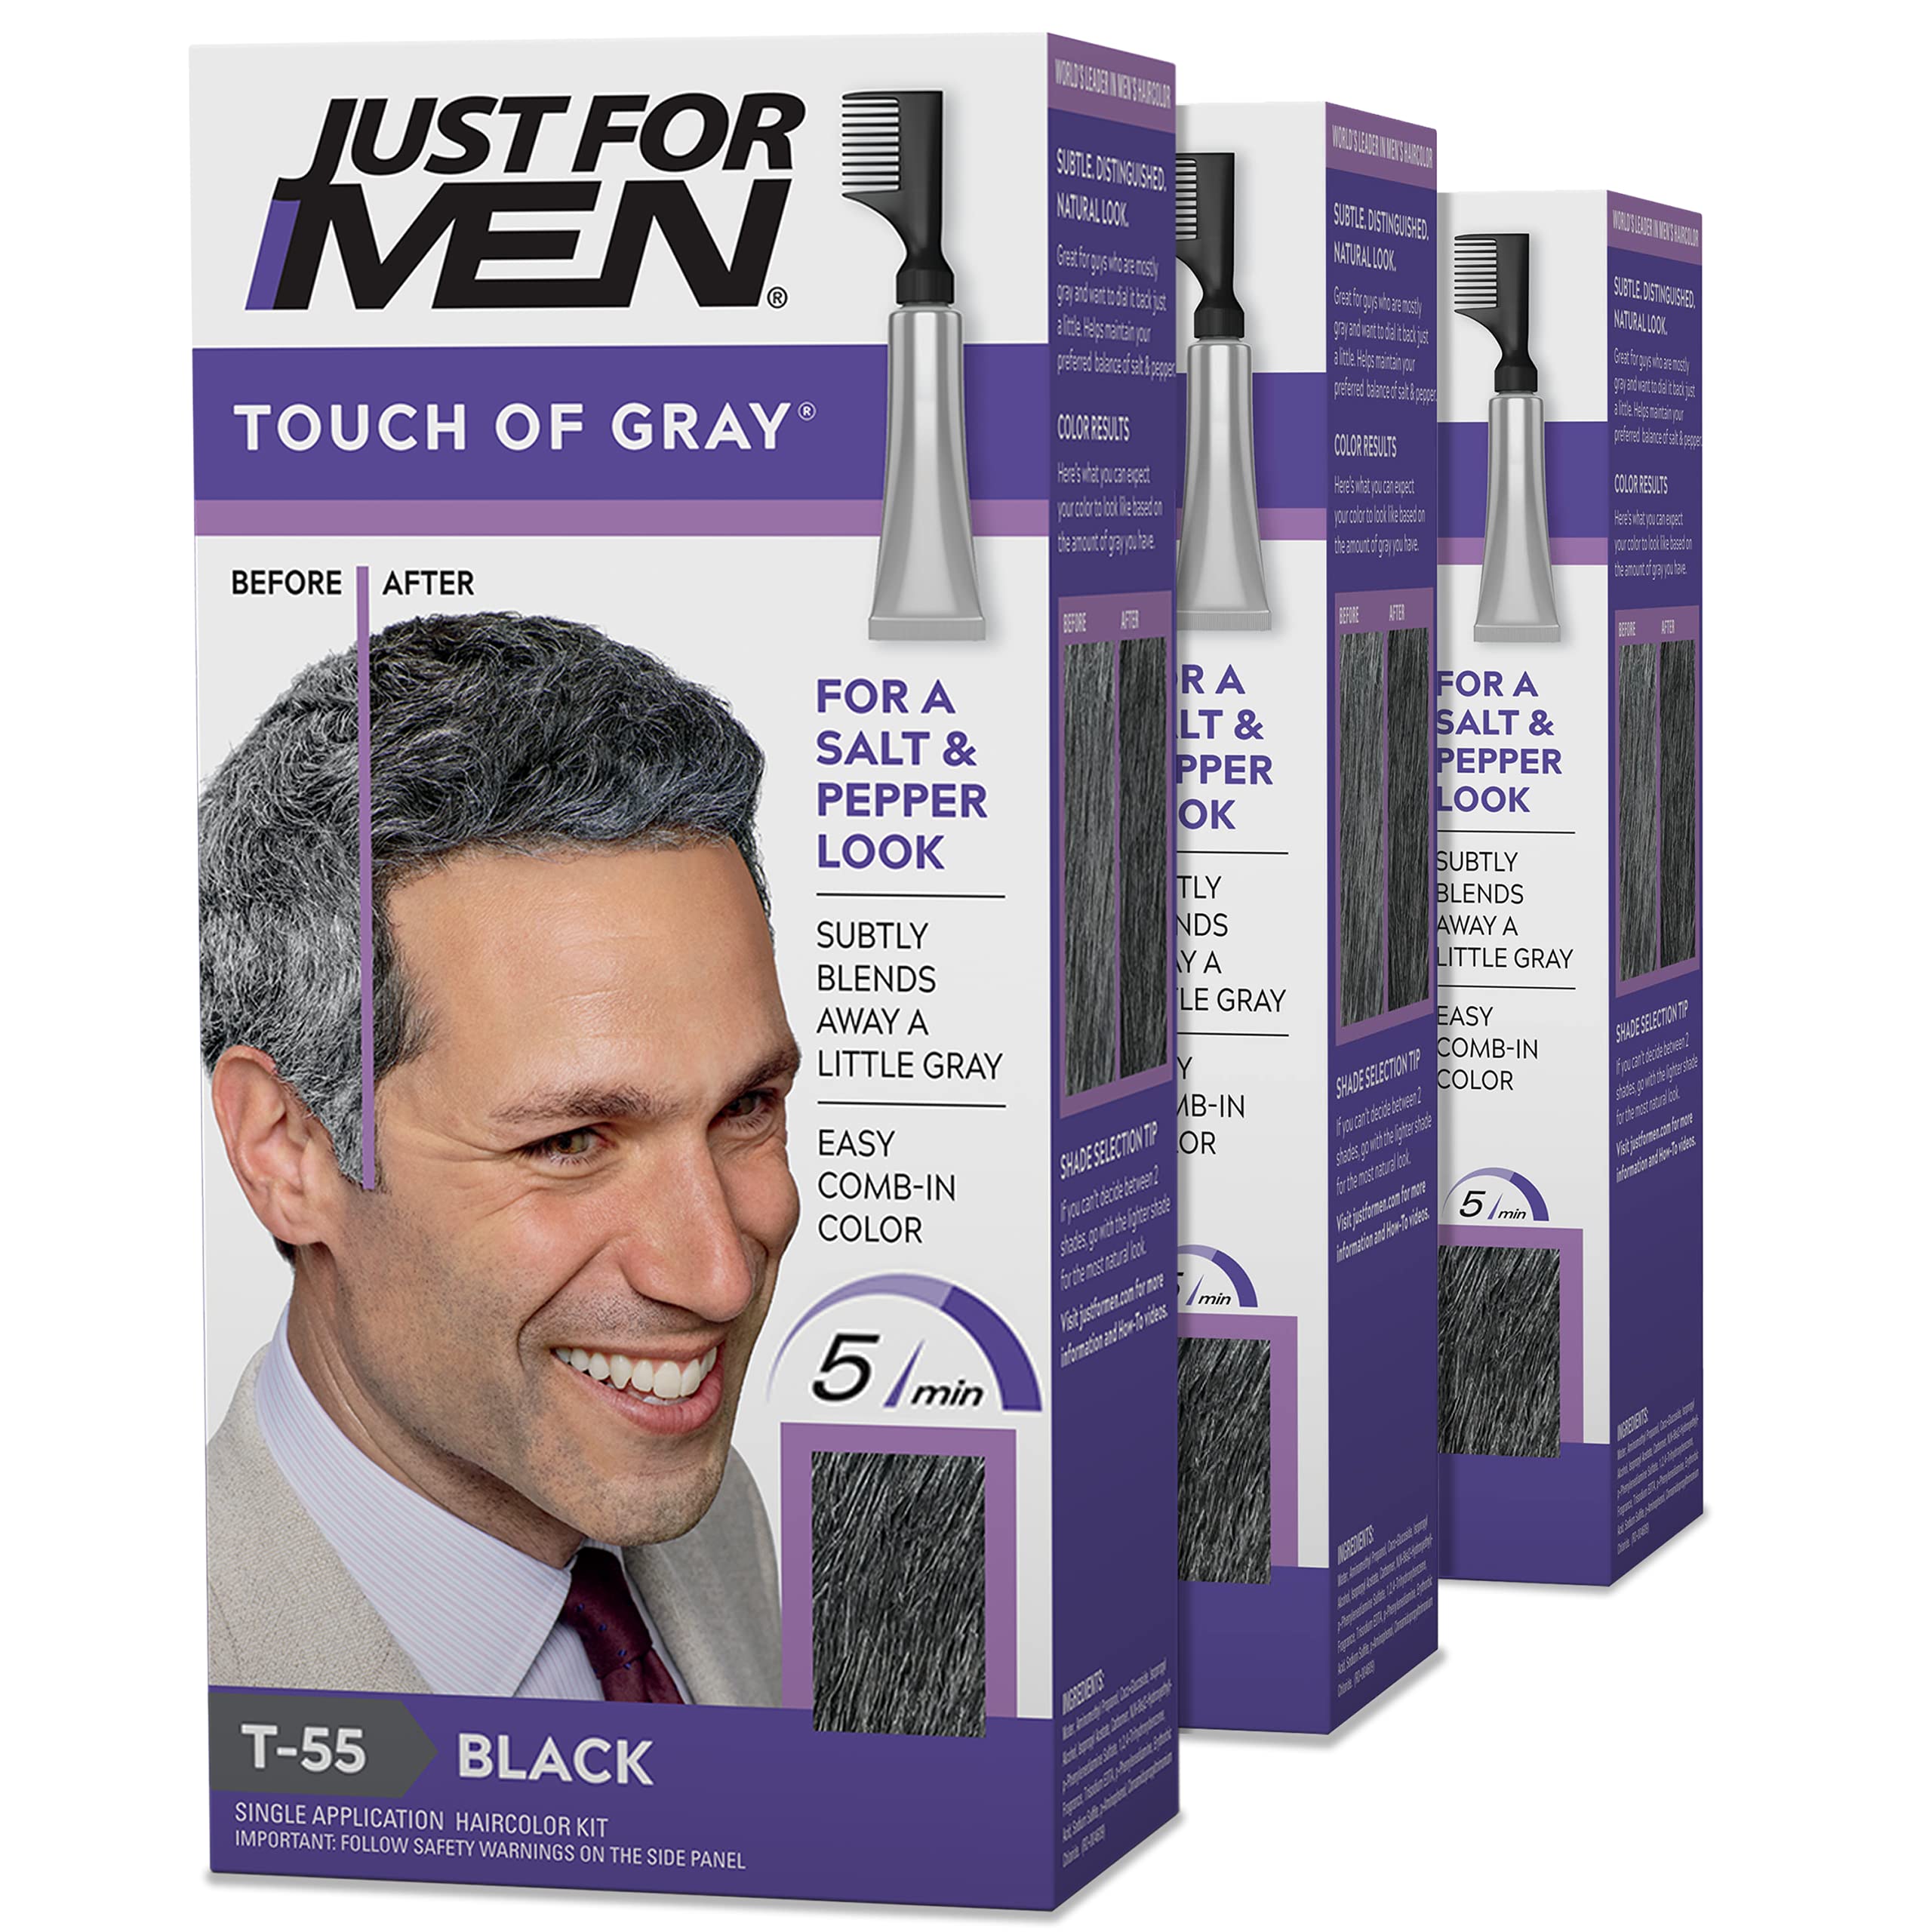 Just For Men Touch of Gray, Mens Hair Color Kit with Comb Applicator for Easy Application, Great for a Salt and Pepper Look - Black, T-55, Pack of 3